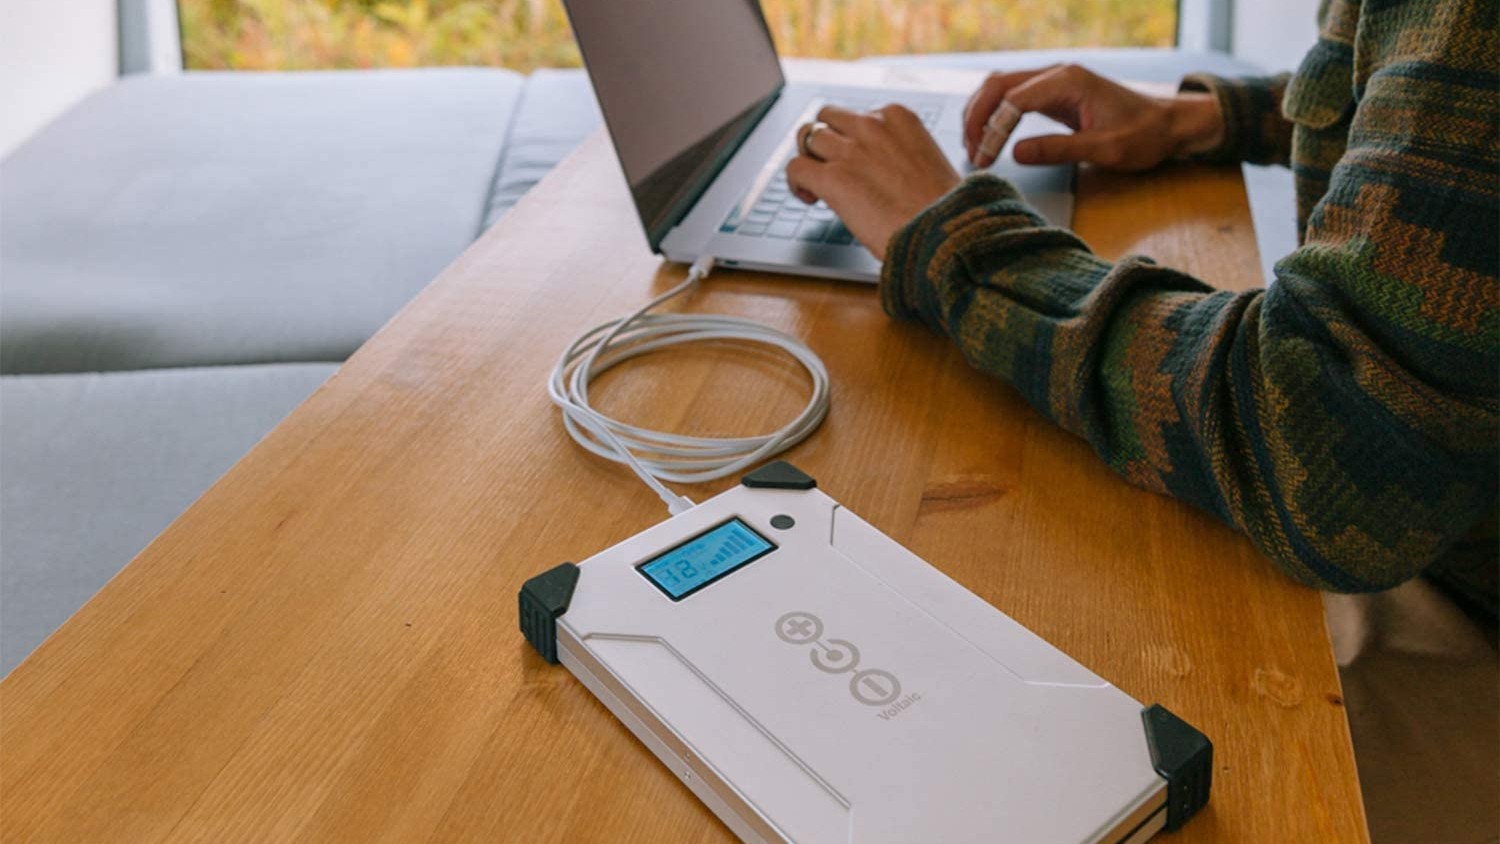 Best laptop power banks to keep you charged, ready for work